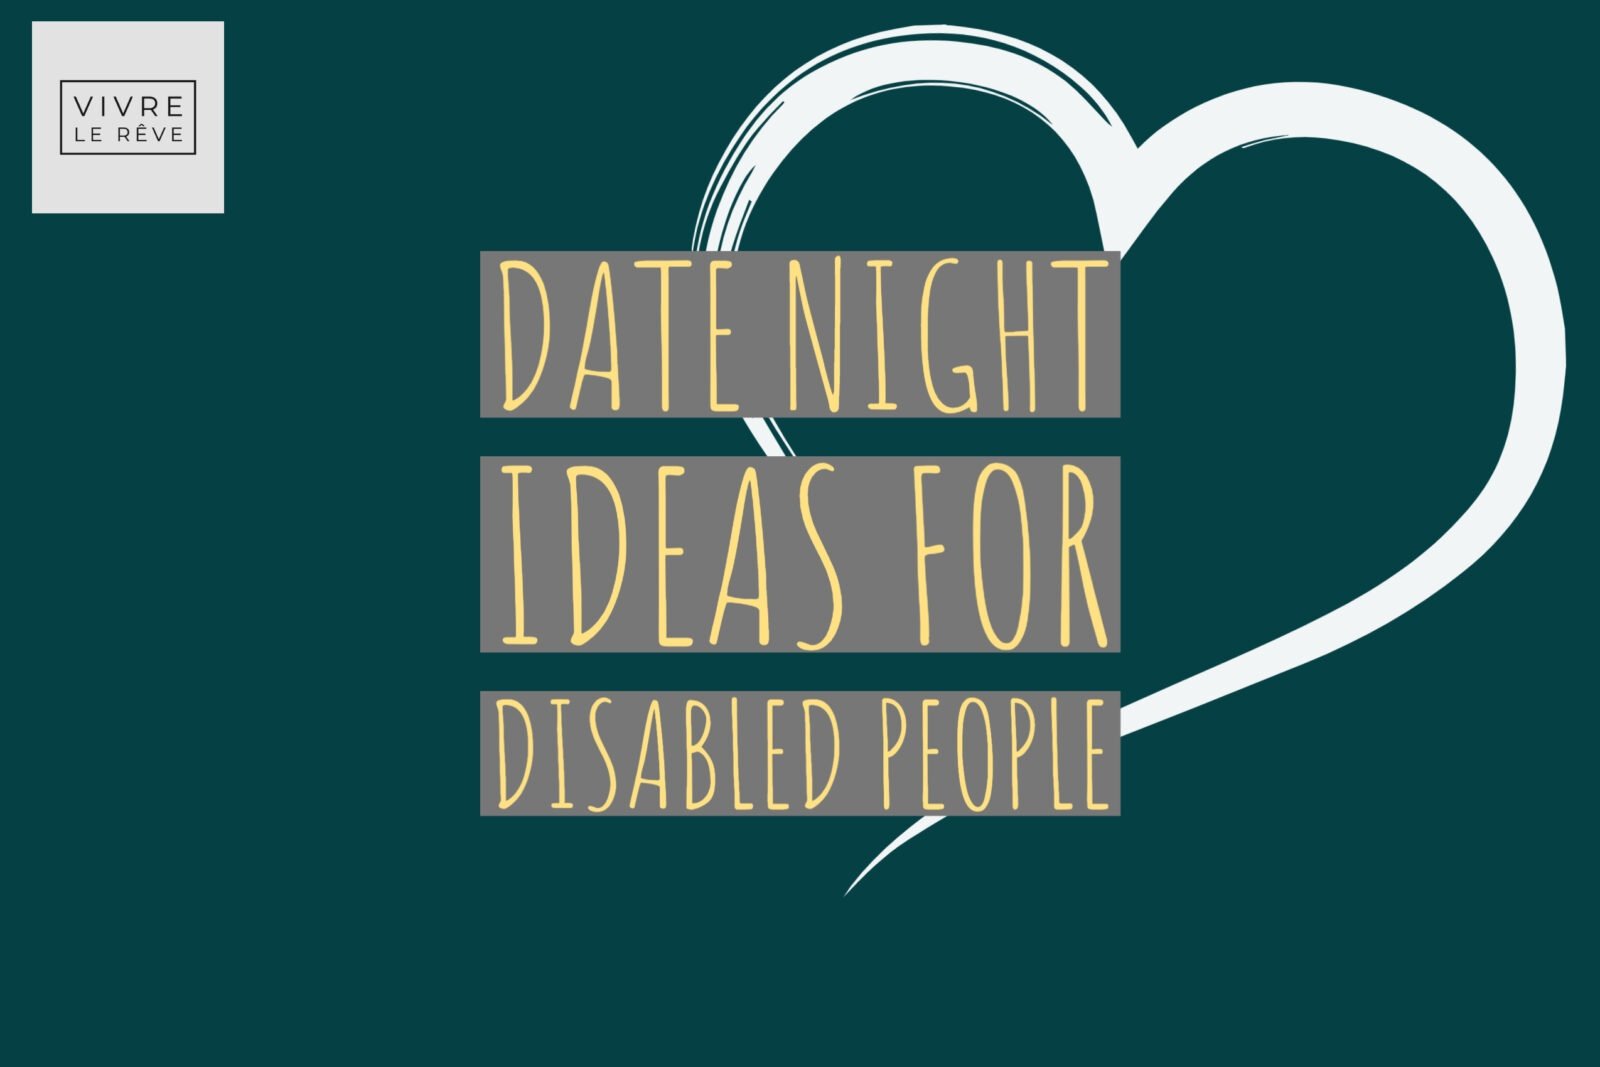 Date Night Ideas for Disabled People